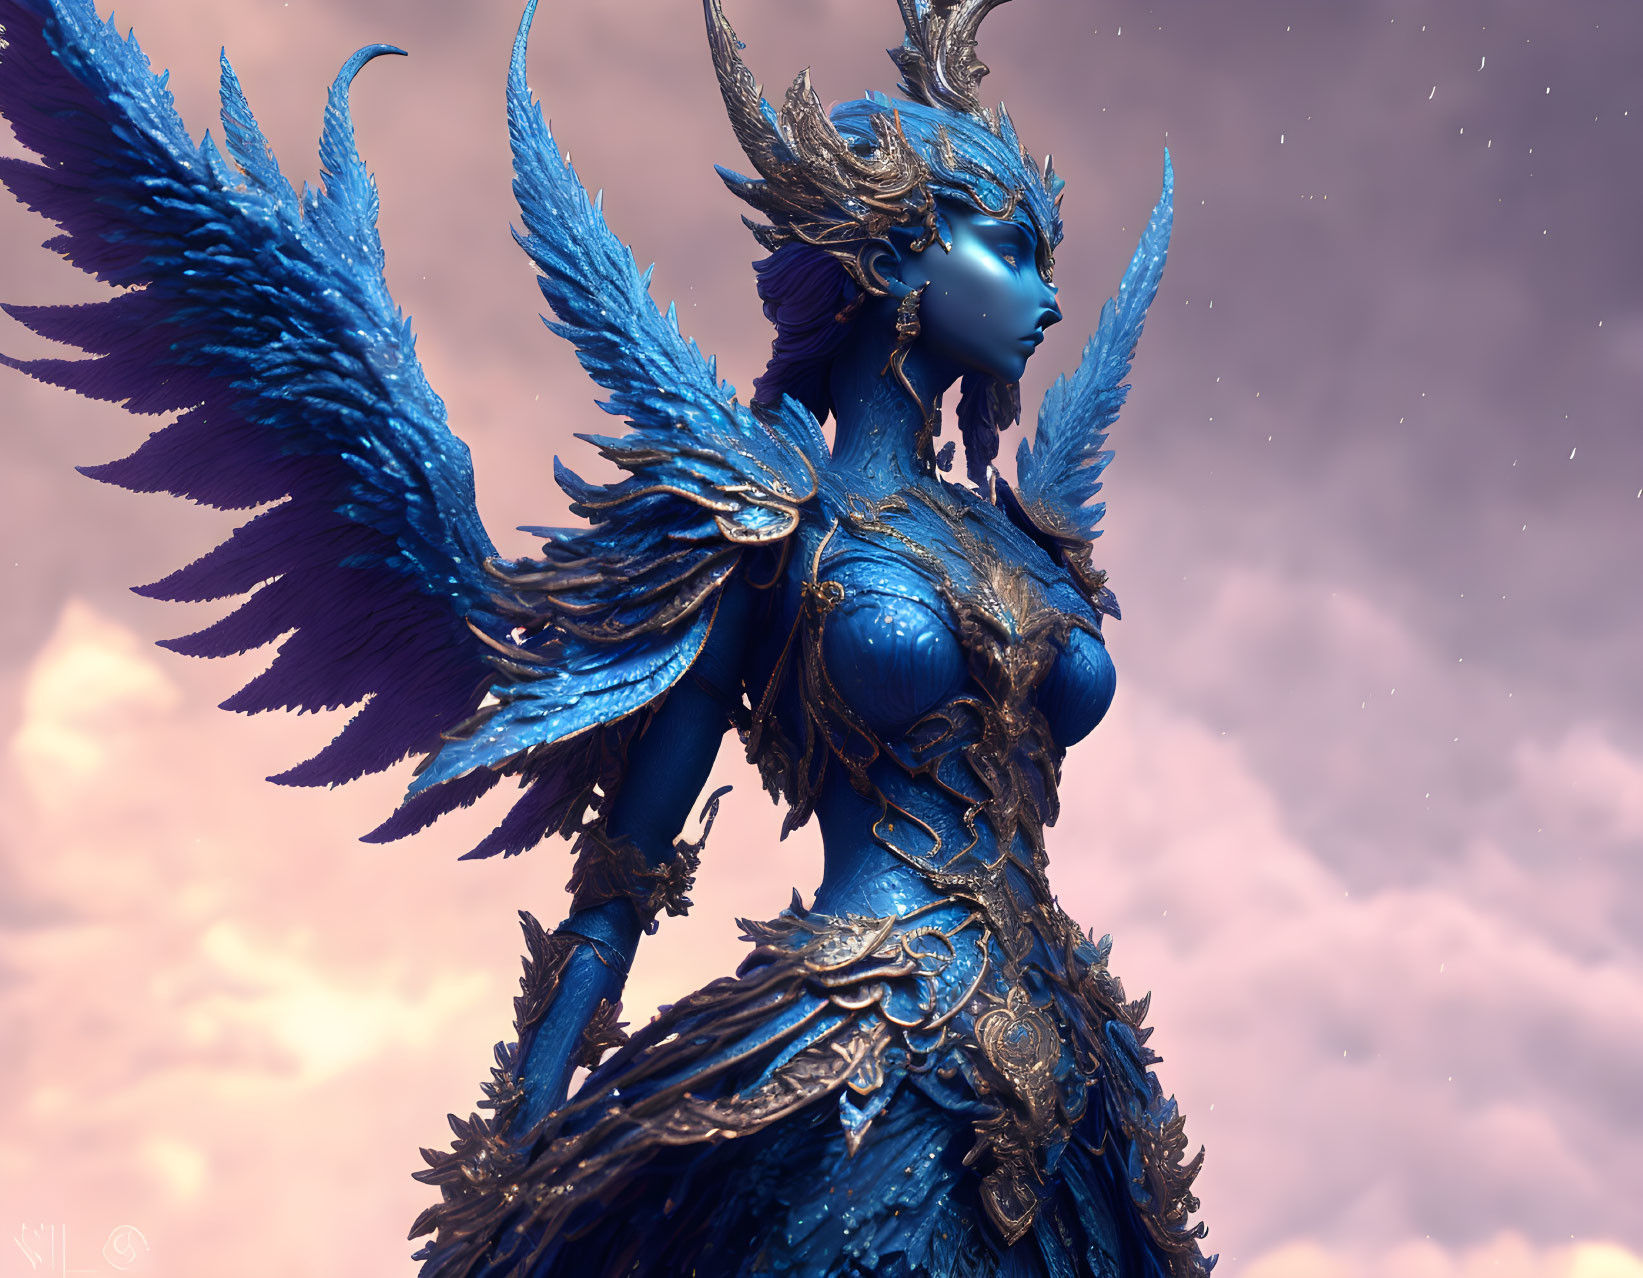 Blue-skinned fantasy character in intricate armor with winged shoulders under dramatic sky